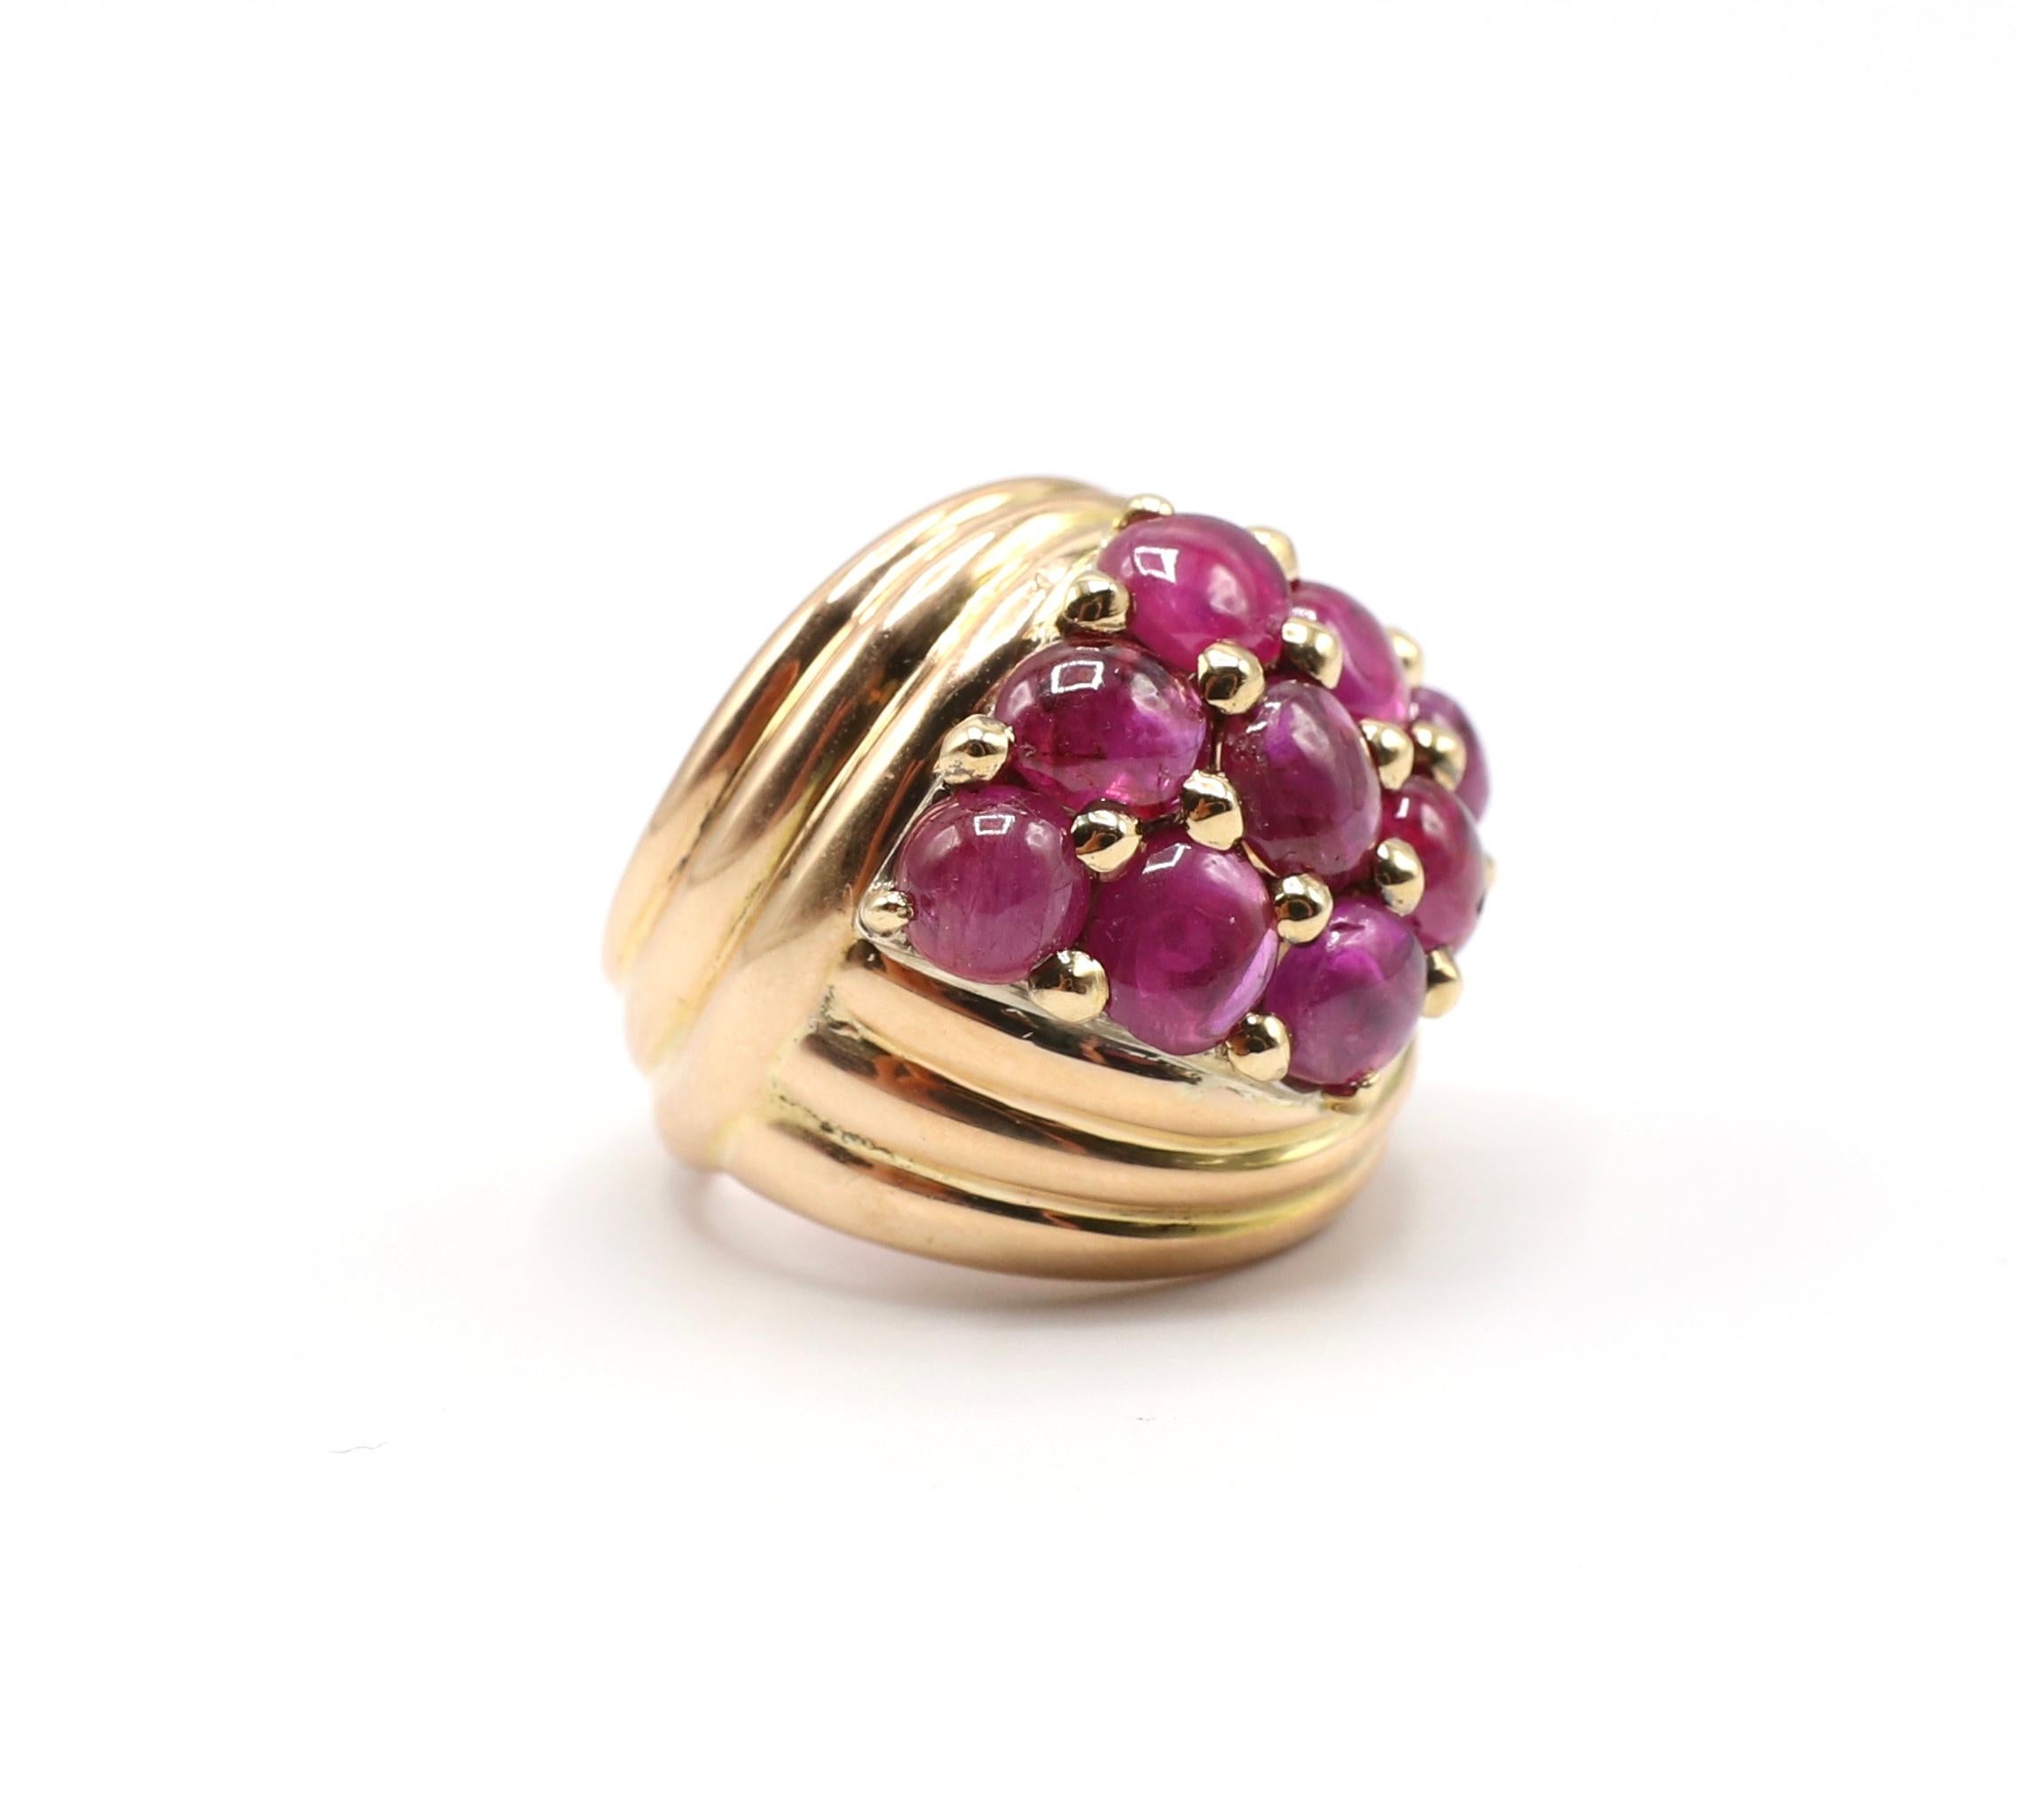 Ruby 18K Yellow Gold Cabochon Cluster Scalloped Dome Cocktail Ring Size 4

Metal: 18k Yellow Gold
Weight: 9.92 grams
Size: 4
Stones: 9 cabochon red rubies,  approx. 5mm each, slightly included 
Scalloped design
Ring measures approx. 21mm on top at